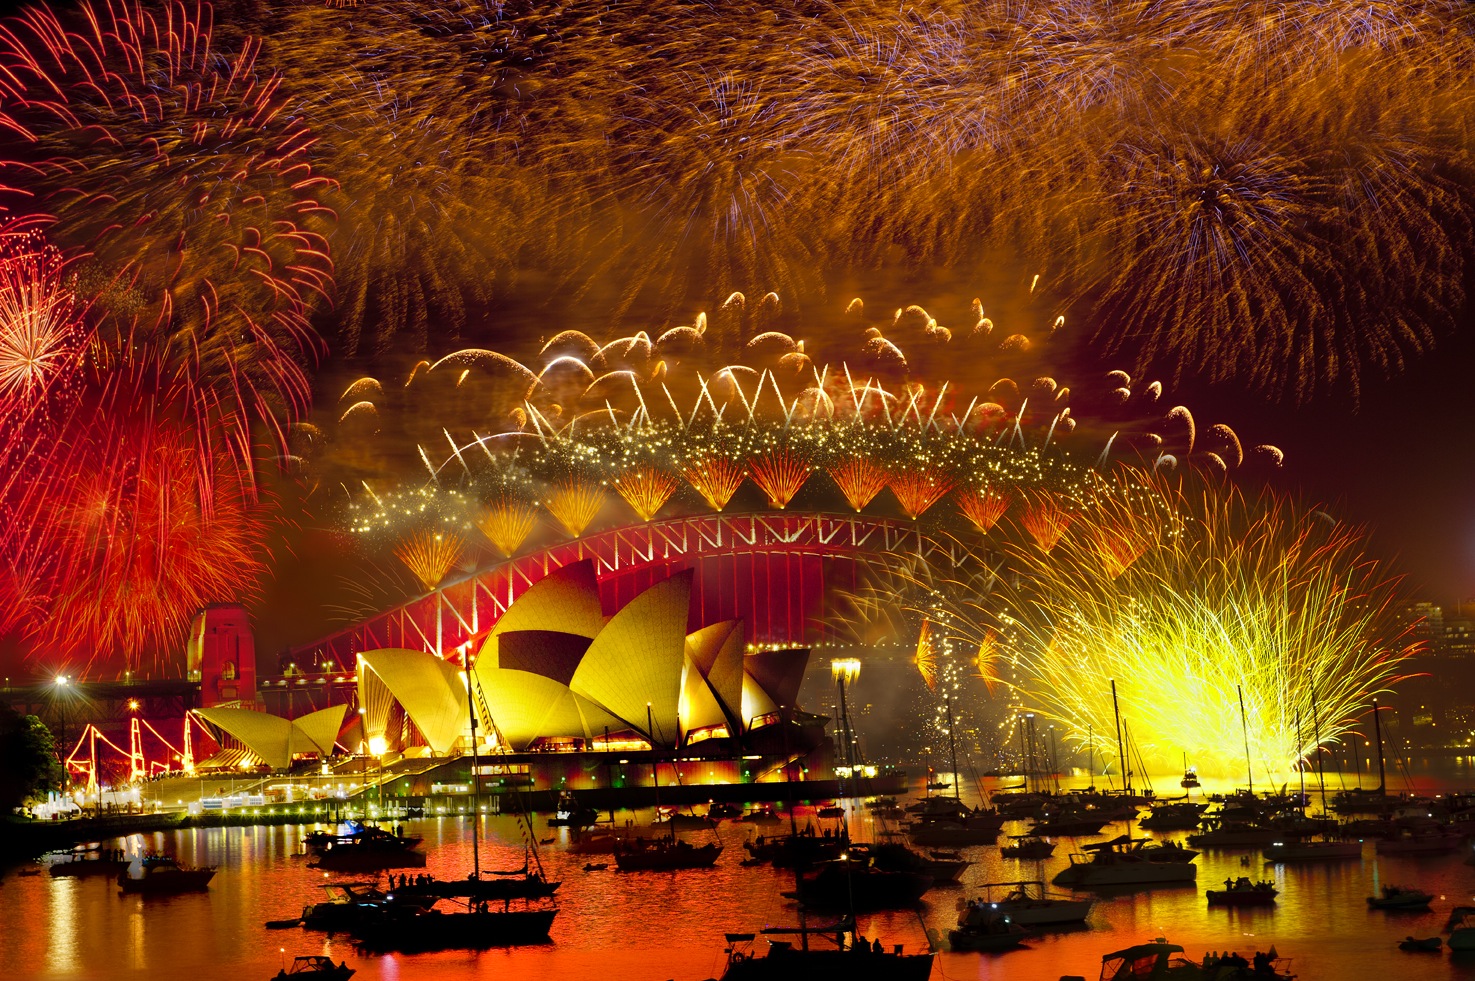 (Sold out) New Years Eve Midnight Fireworks Cruise - vessel EXTREME II - Departing Manly Wharf